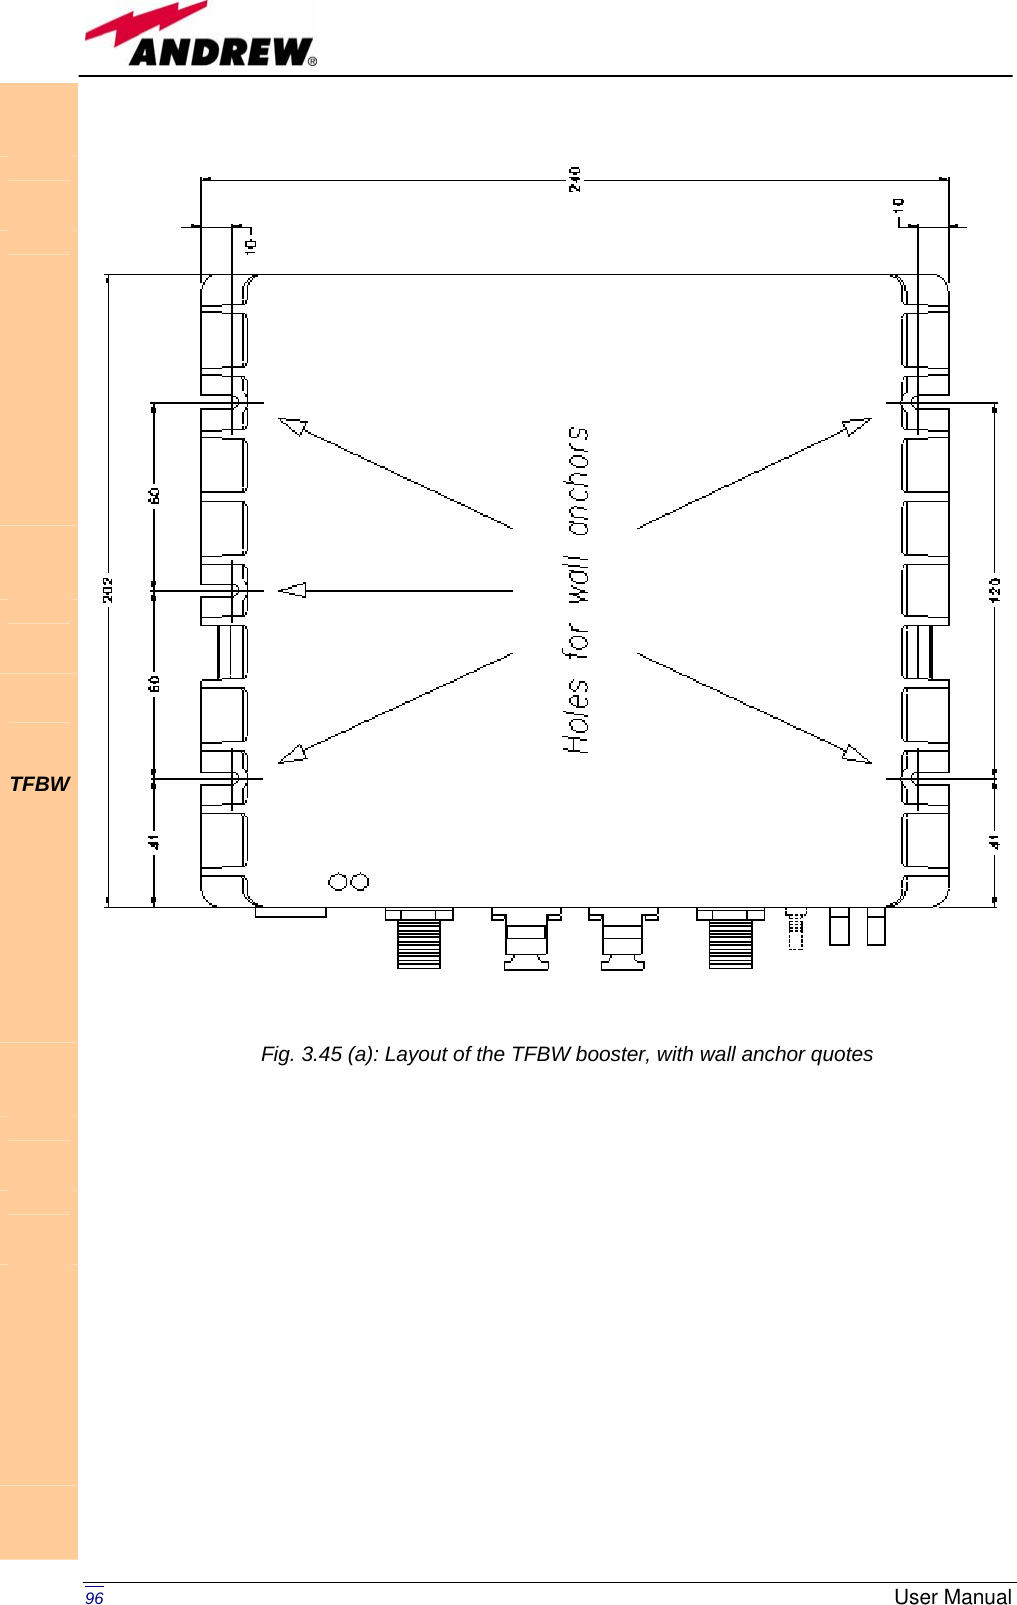   96  User Manual                              TFBW           Fig. 3.45 (a): Layout of the TFBW booster, with wall anchor quotes 